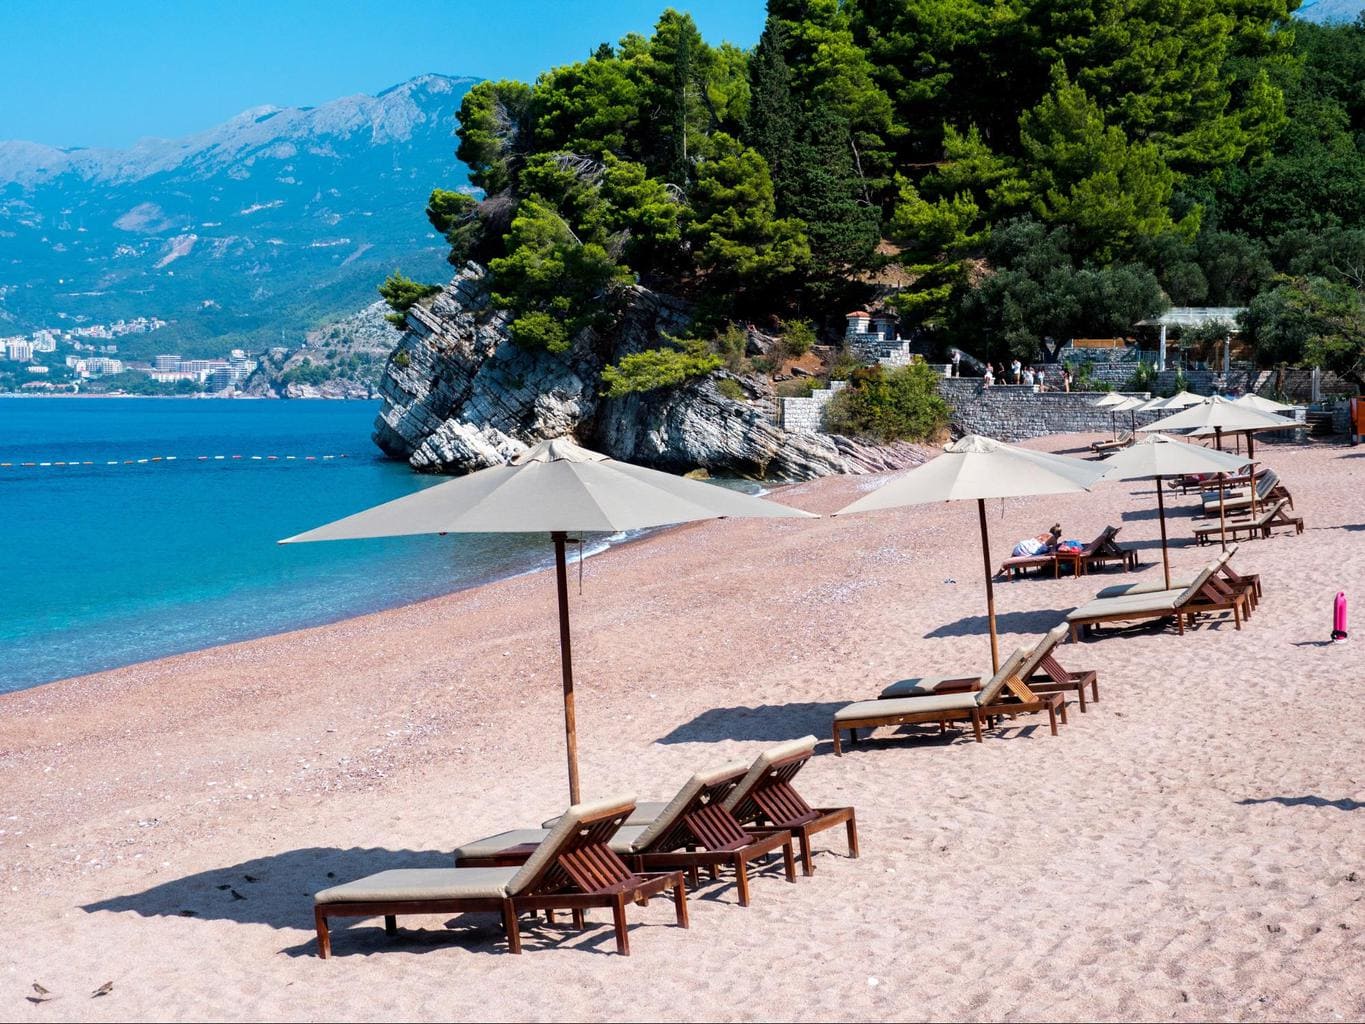 Sunbeds and umbrellas fill the beaches in Montenegro